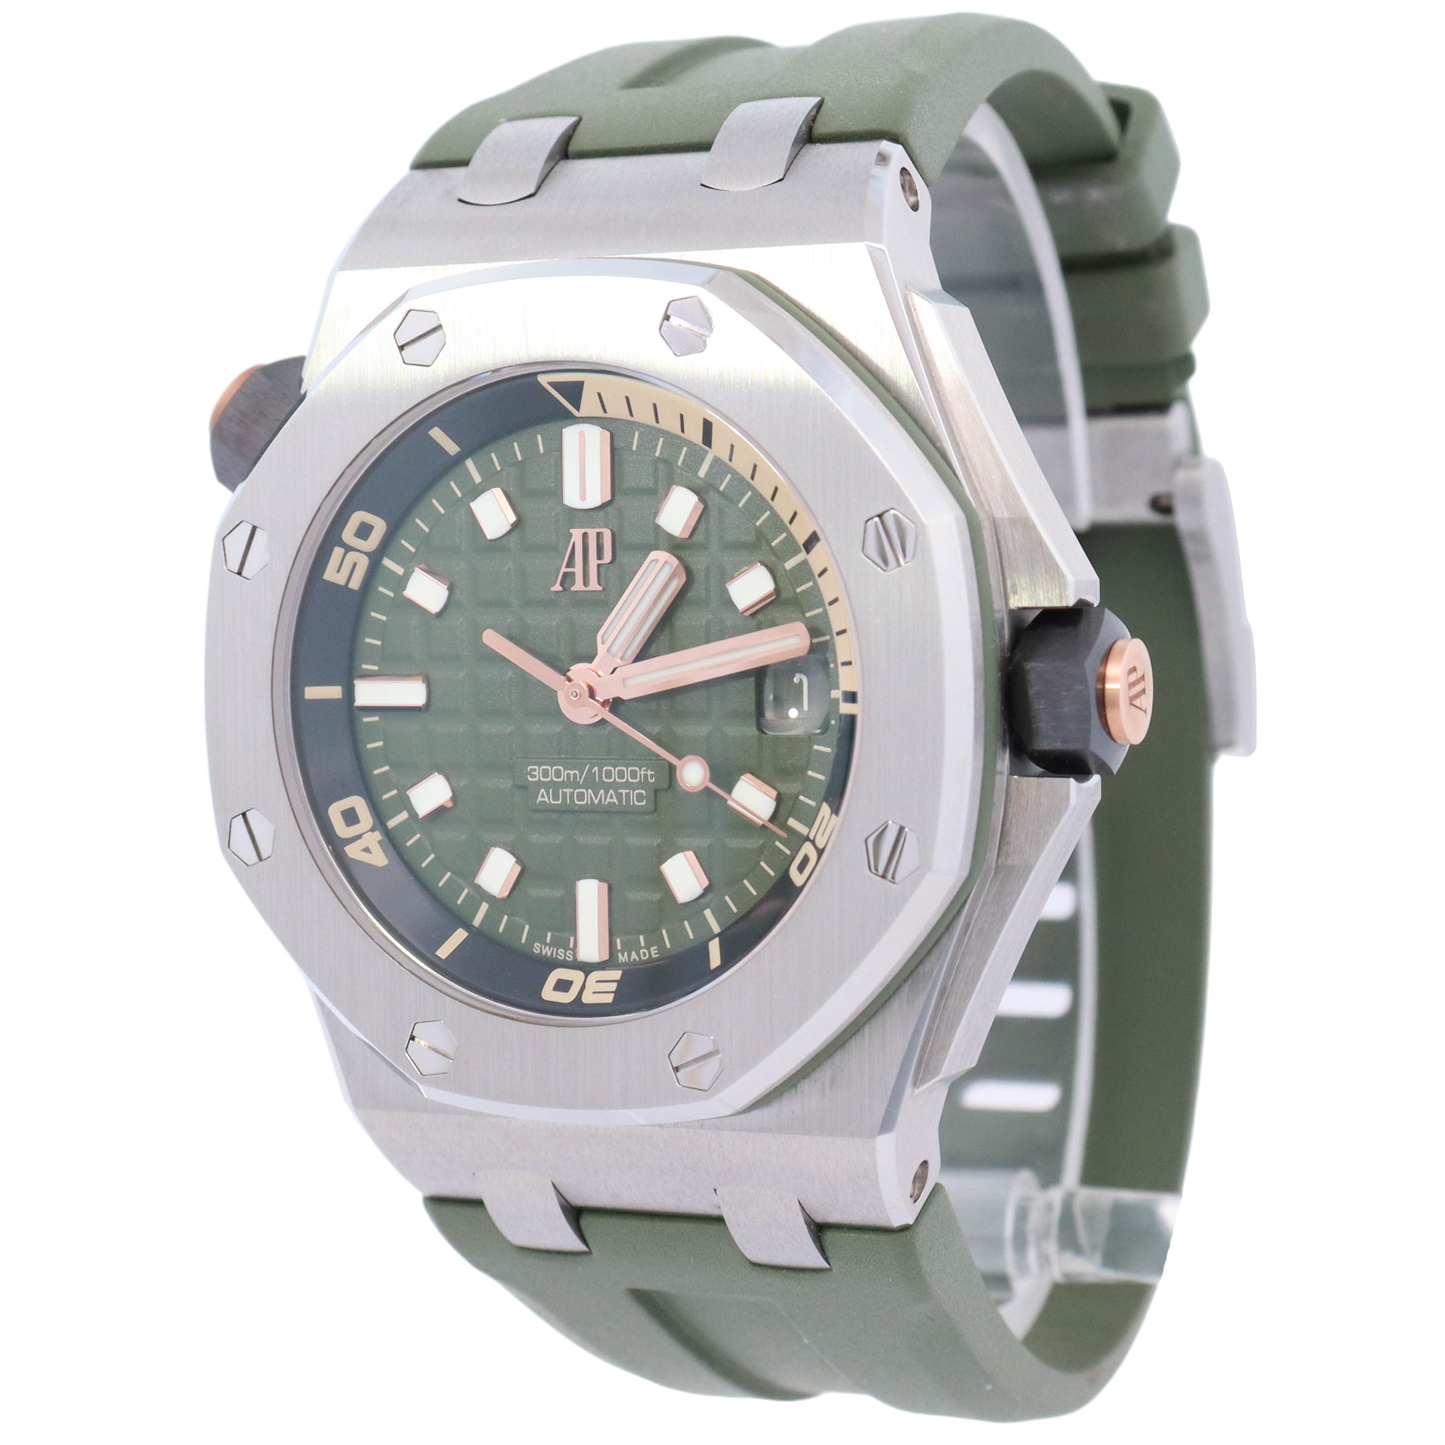 Audemars Piguet Royal Oak Offshore 42mm Stainless Steel Green Stick Dial Watch Reference# 15720ST.OO.A052CA.01 - Happy Jewelers Fine Jewelry Lifetime Warranty